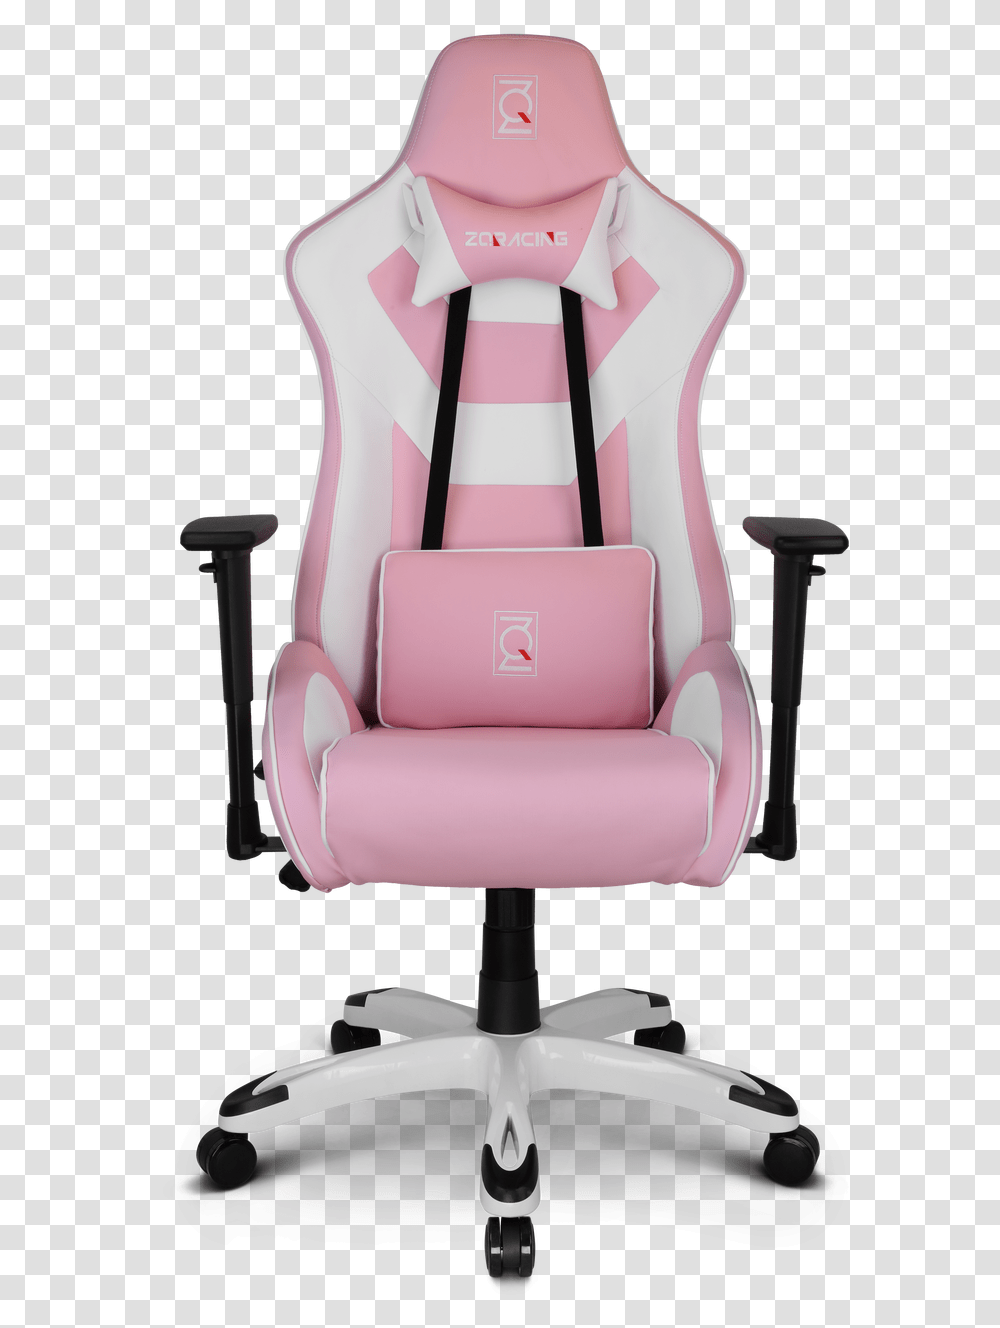 Zq Racing Viper Series Ergonomic Gaming Chair White Pink Gamer Chair, Furniture, Cushion, Armchair, Couch Transparent Png